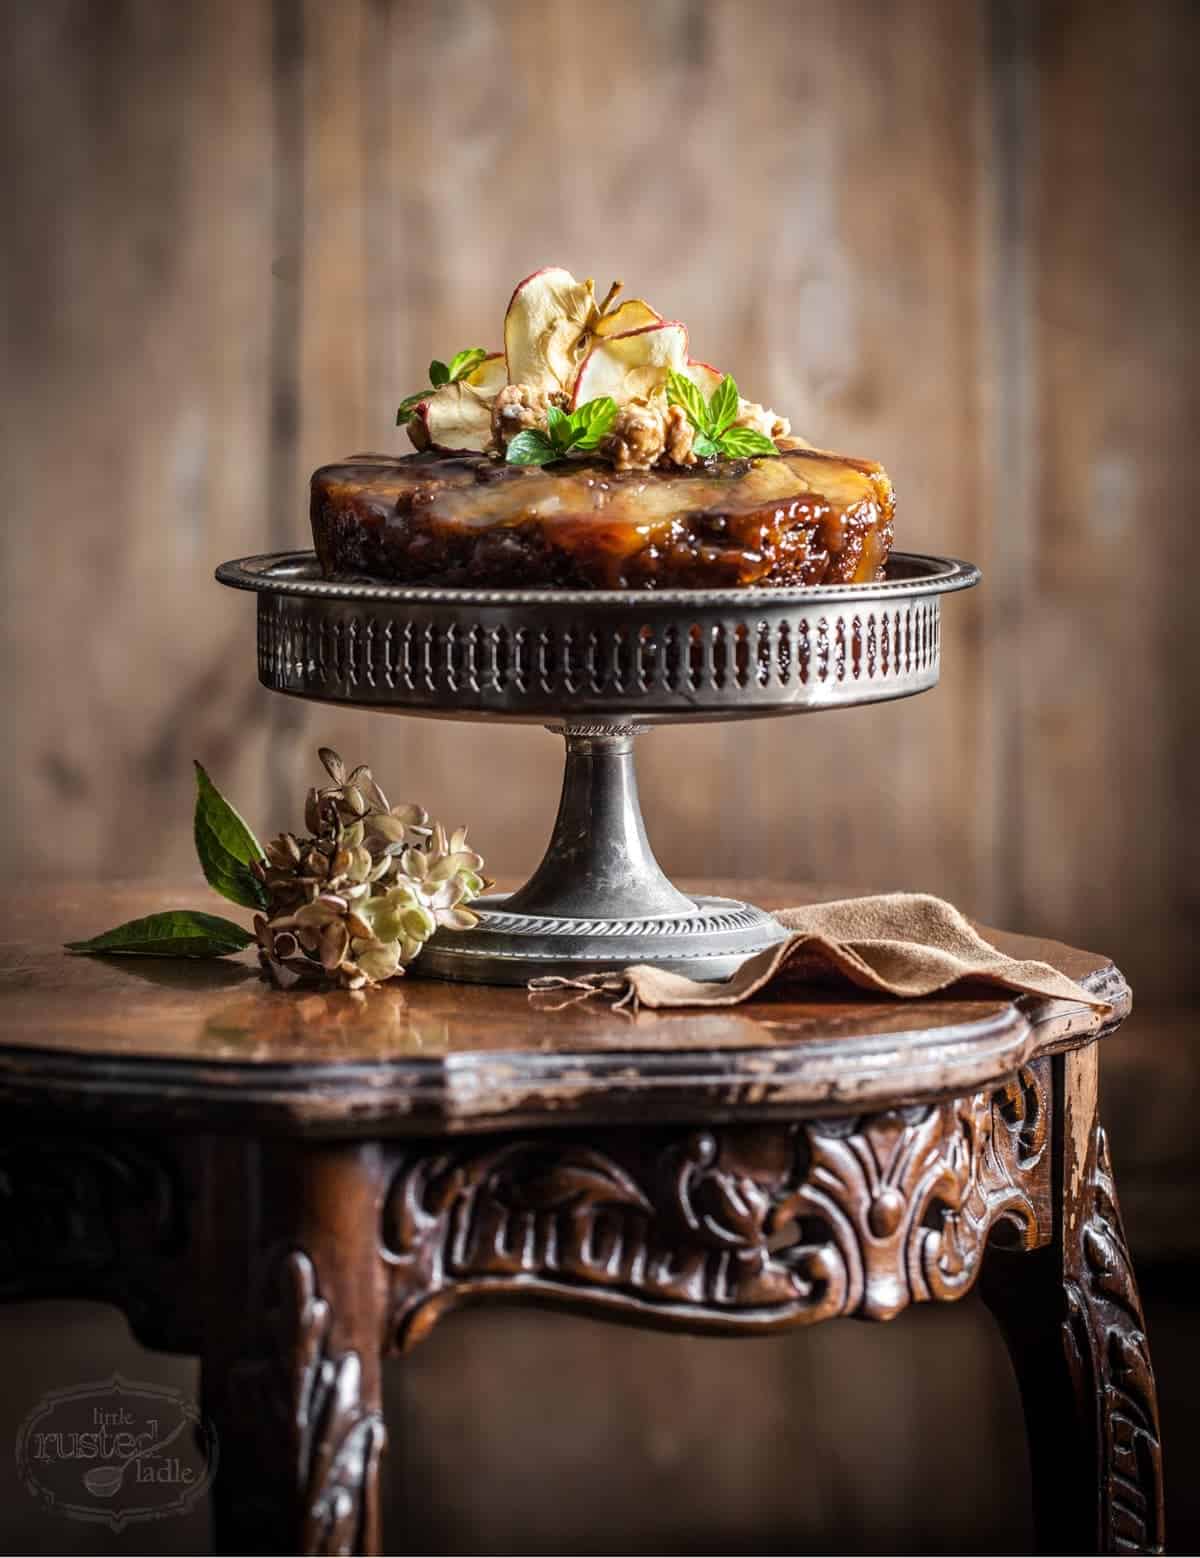 Apple Cider Cake Recipes_Little Rusted Ladle_Jena Carlin Photography_Rude on Food_4 96WM